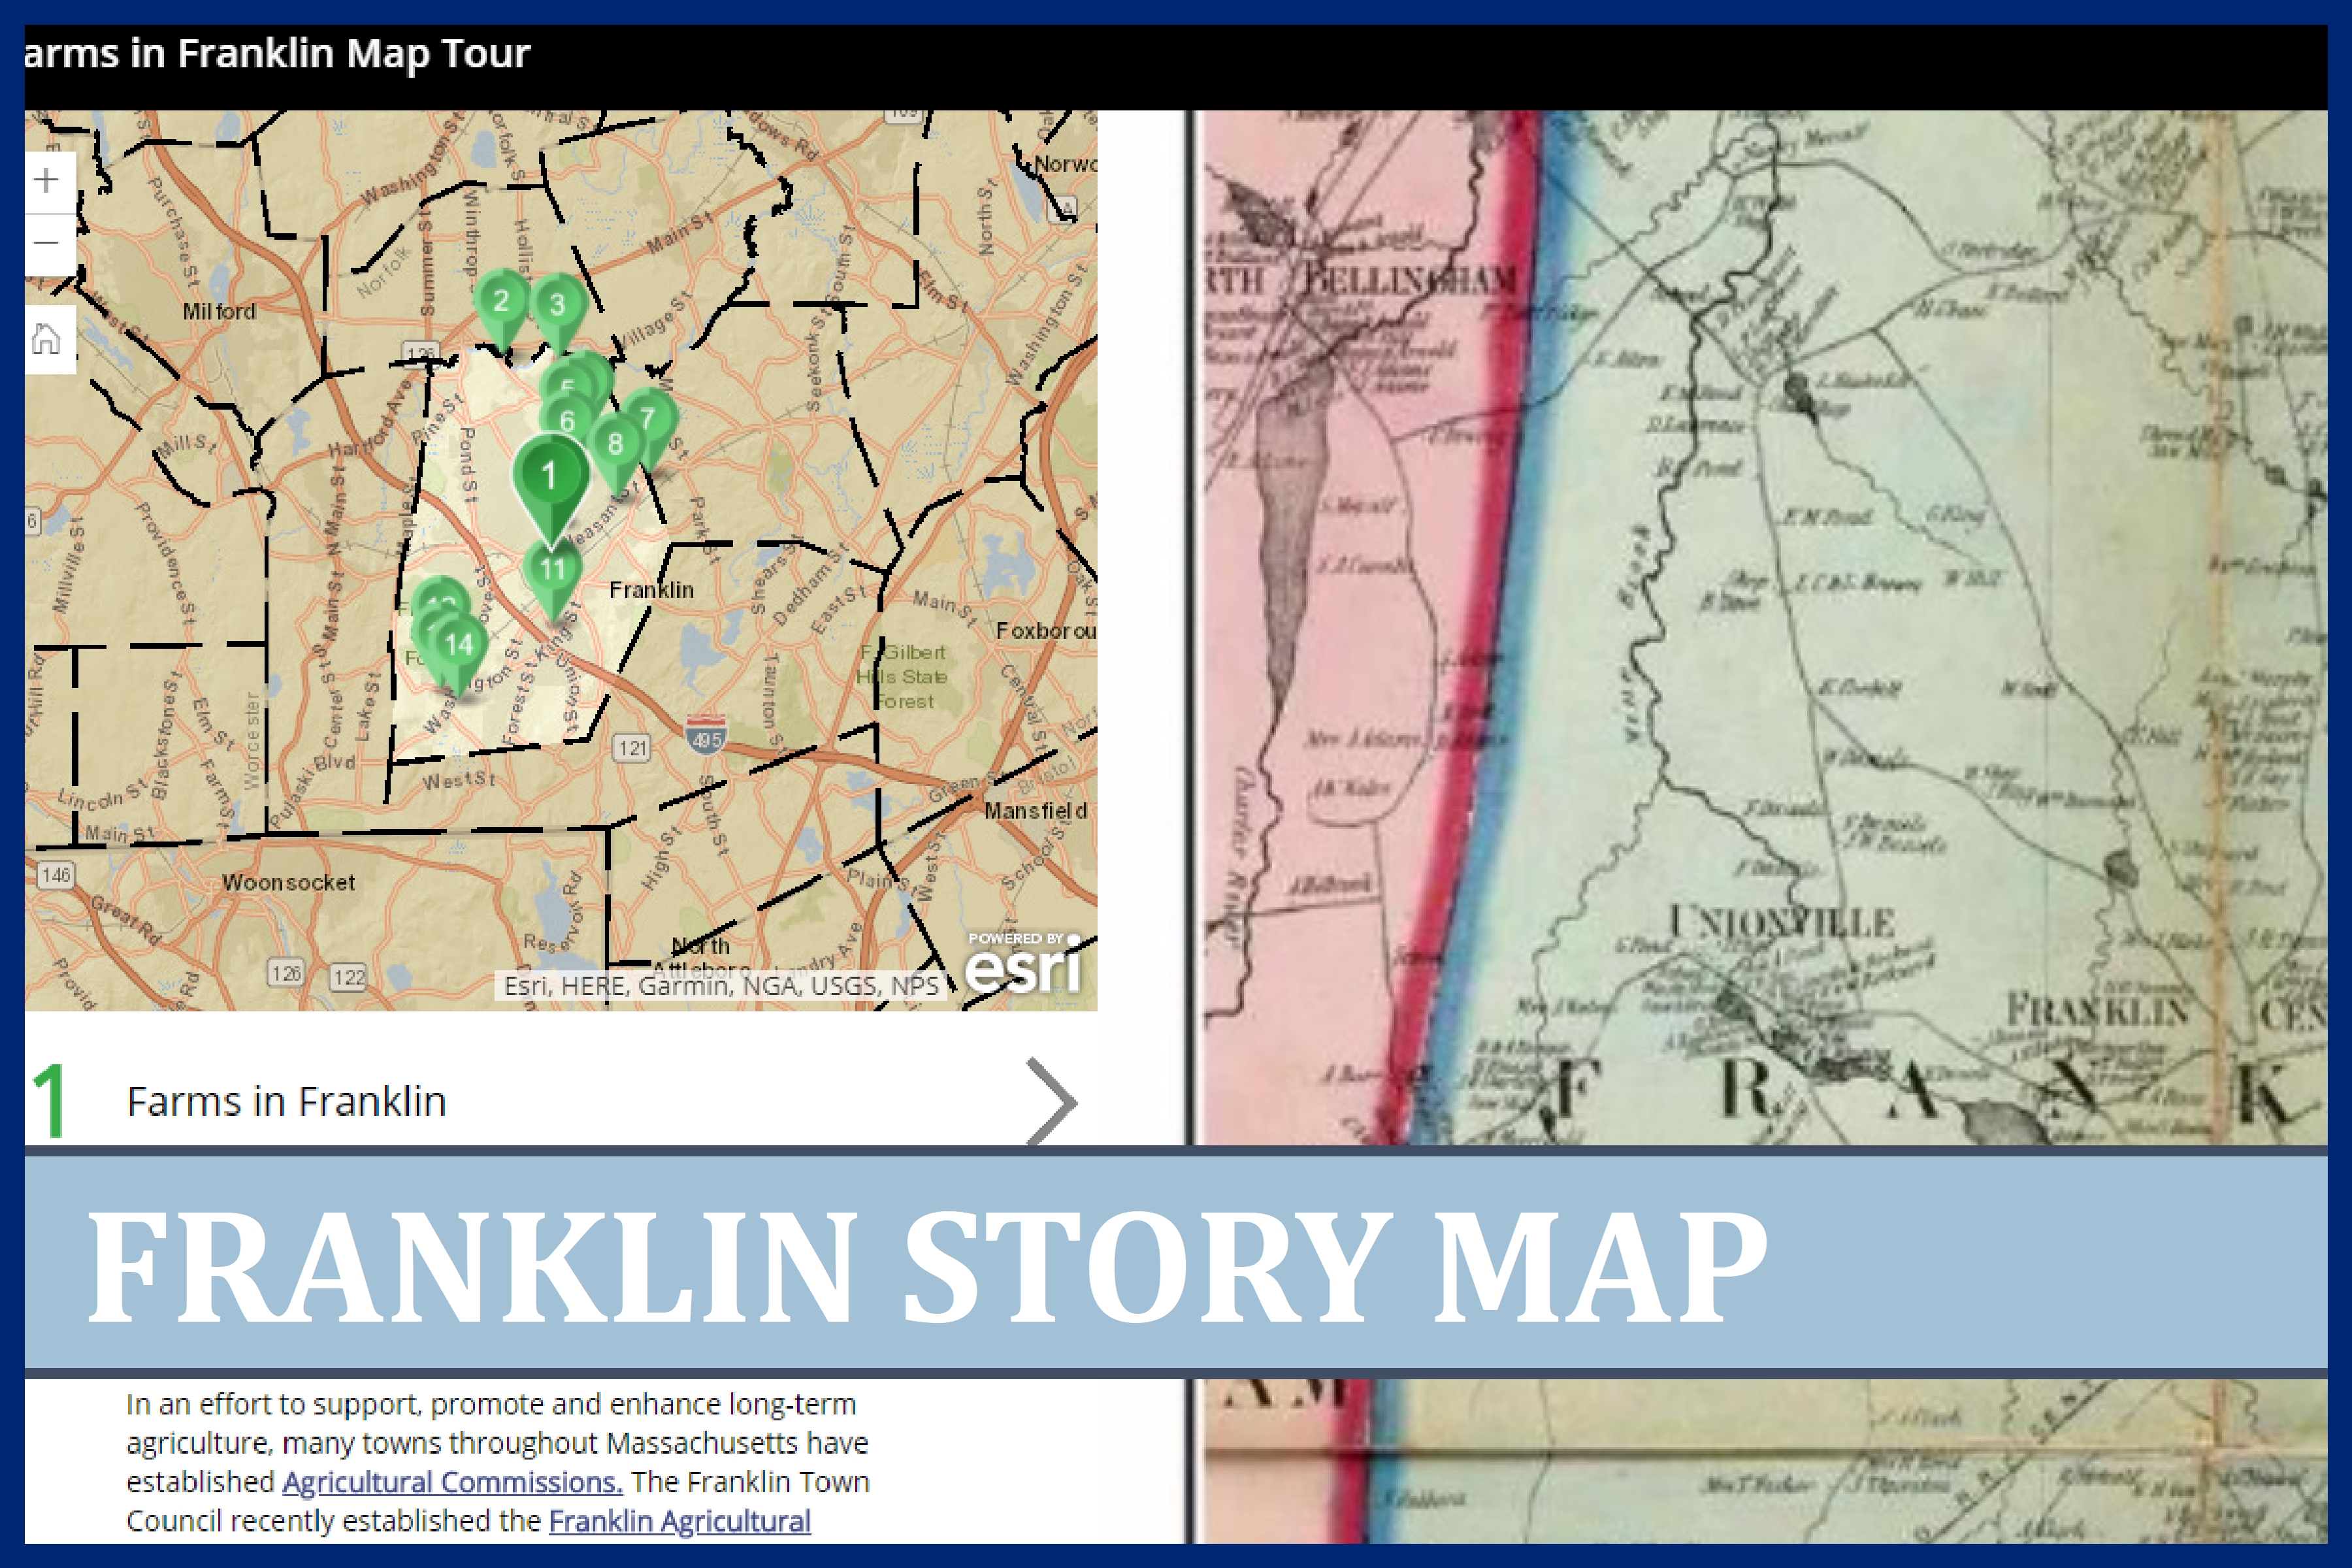 Farms in Franklin story map image